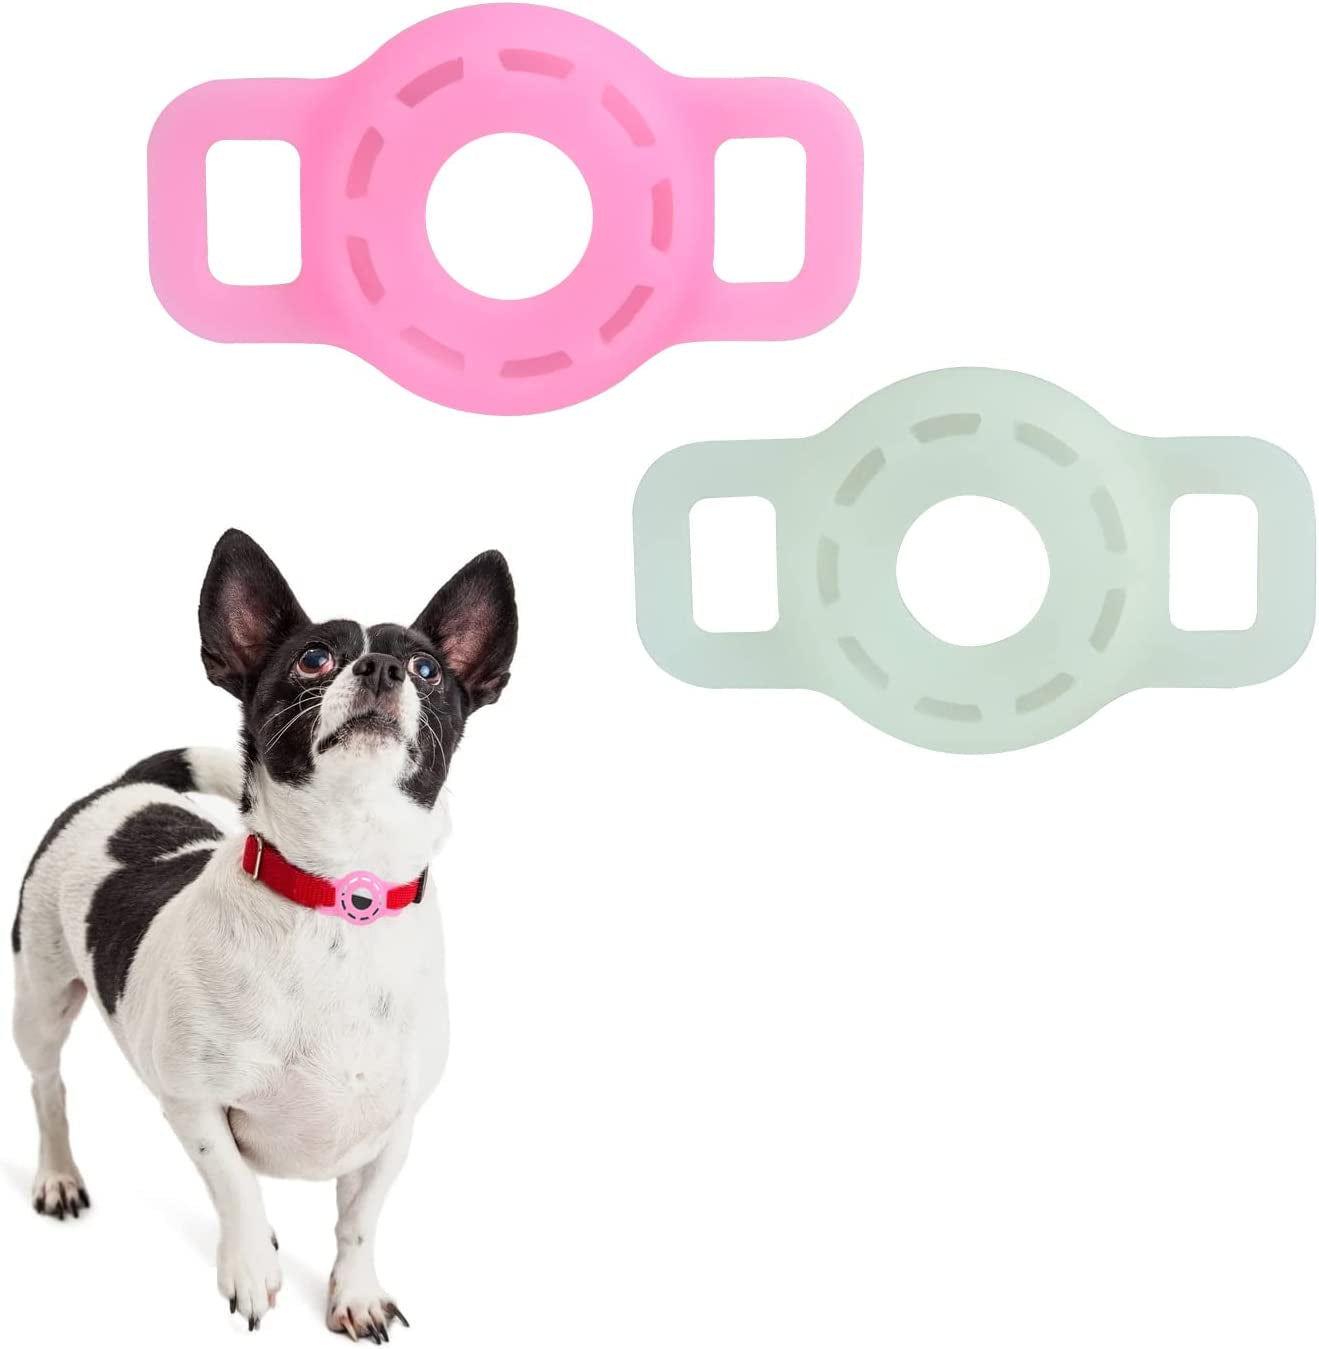 Funincrea 2 Pcs Airtag Case for Dog Collar, Anti-Scratch Silicone Airtag Dog Collar Holder GPS Tracker Case Compatible with Apple, Airtag Protective Case for Pet Collar (Luminous Green/Luminous Pink)